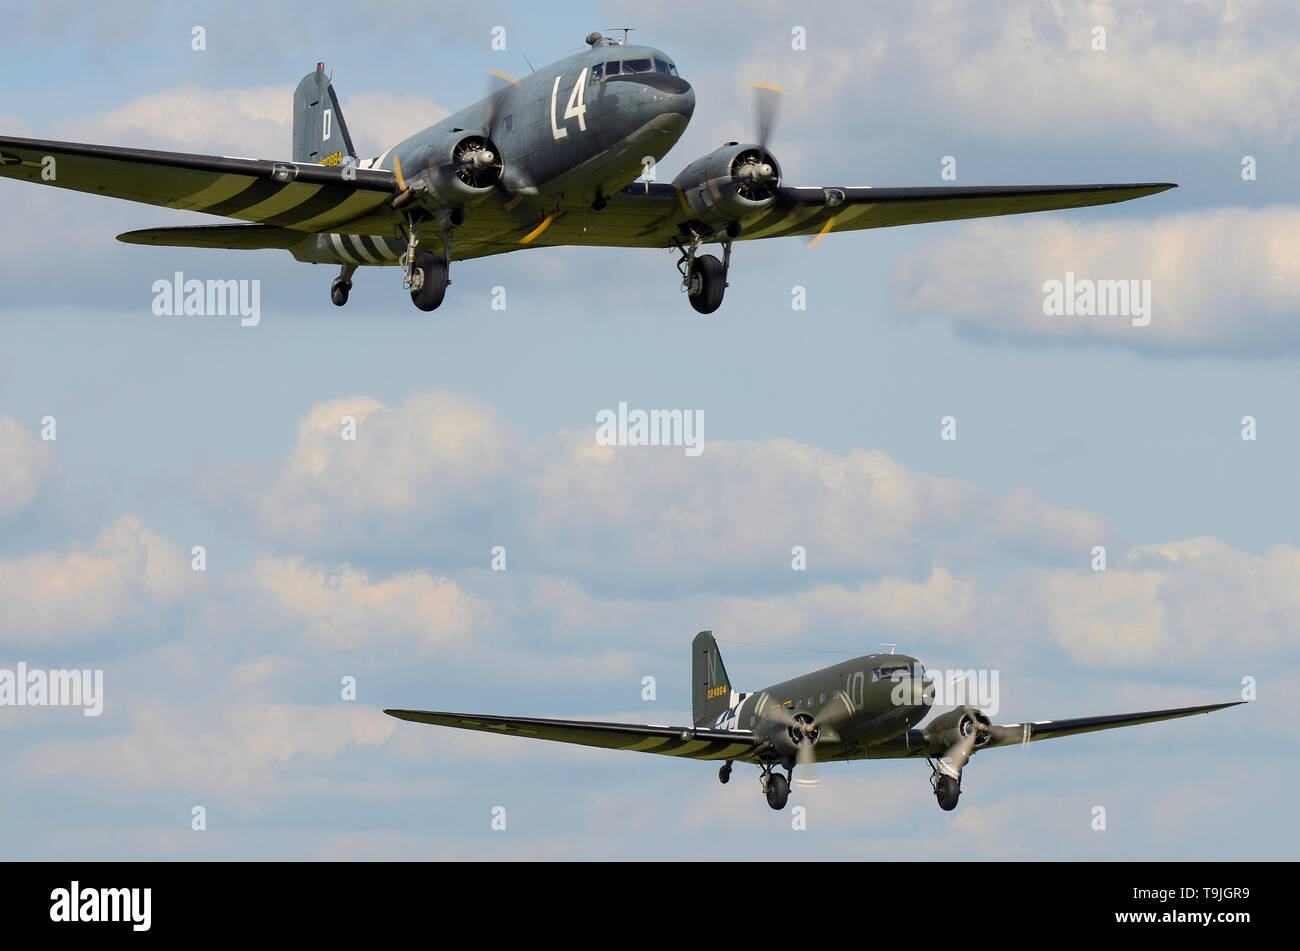 Second World war Douglas C-47 Skytrain planes in period camouflage markings - including D Day 'invasion stripes' - taking off together. World War Two Stock Photo